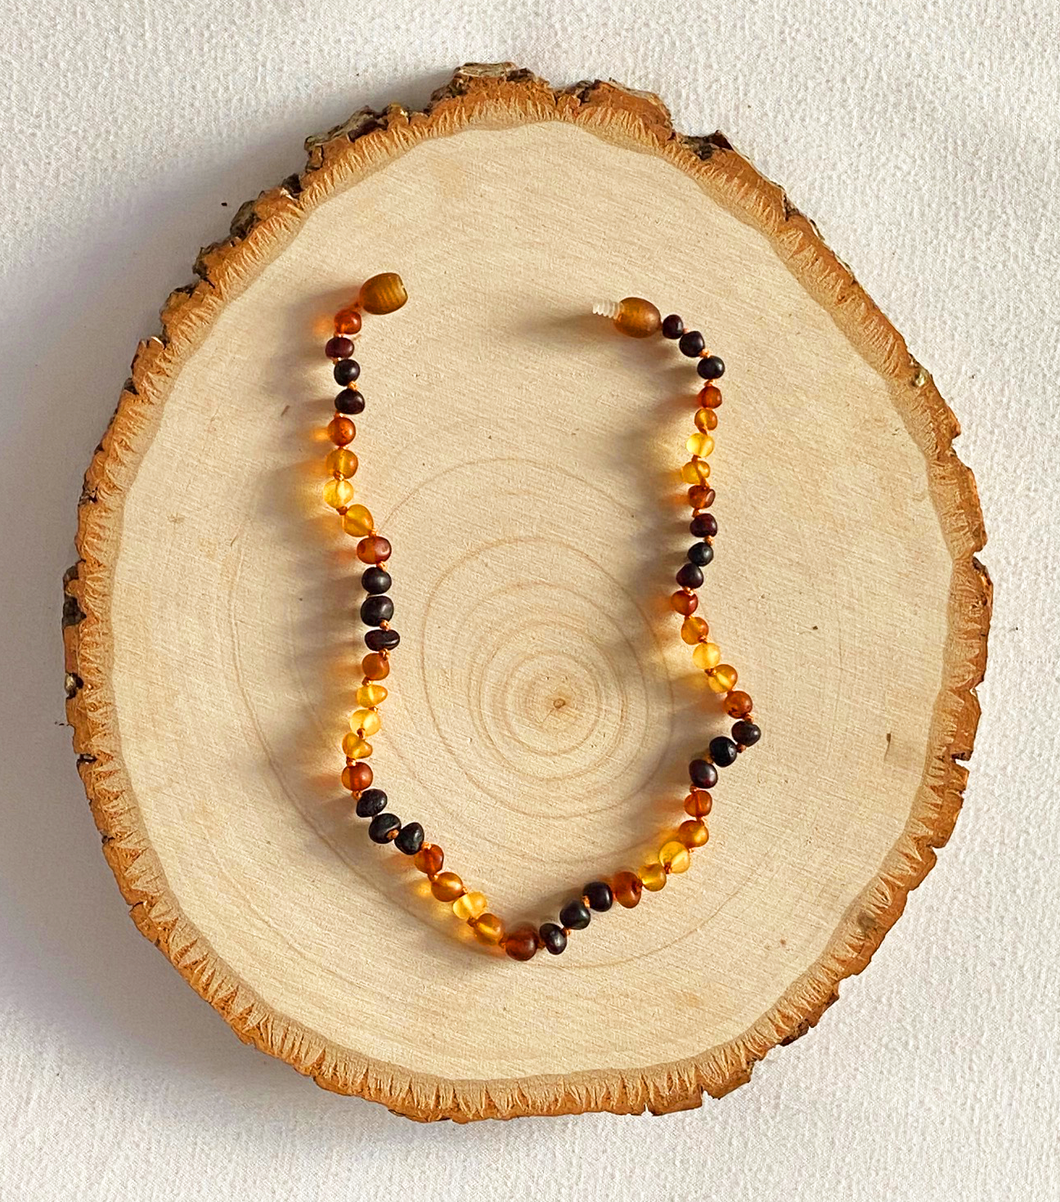 Baby Amber Necklace